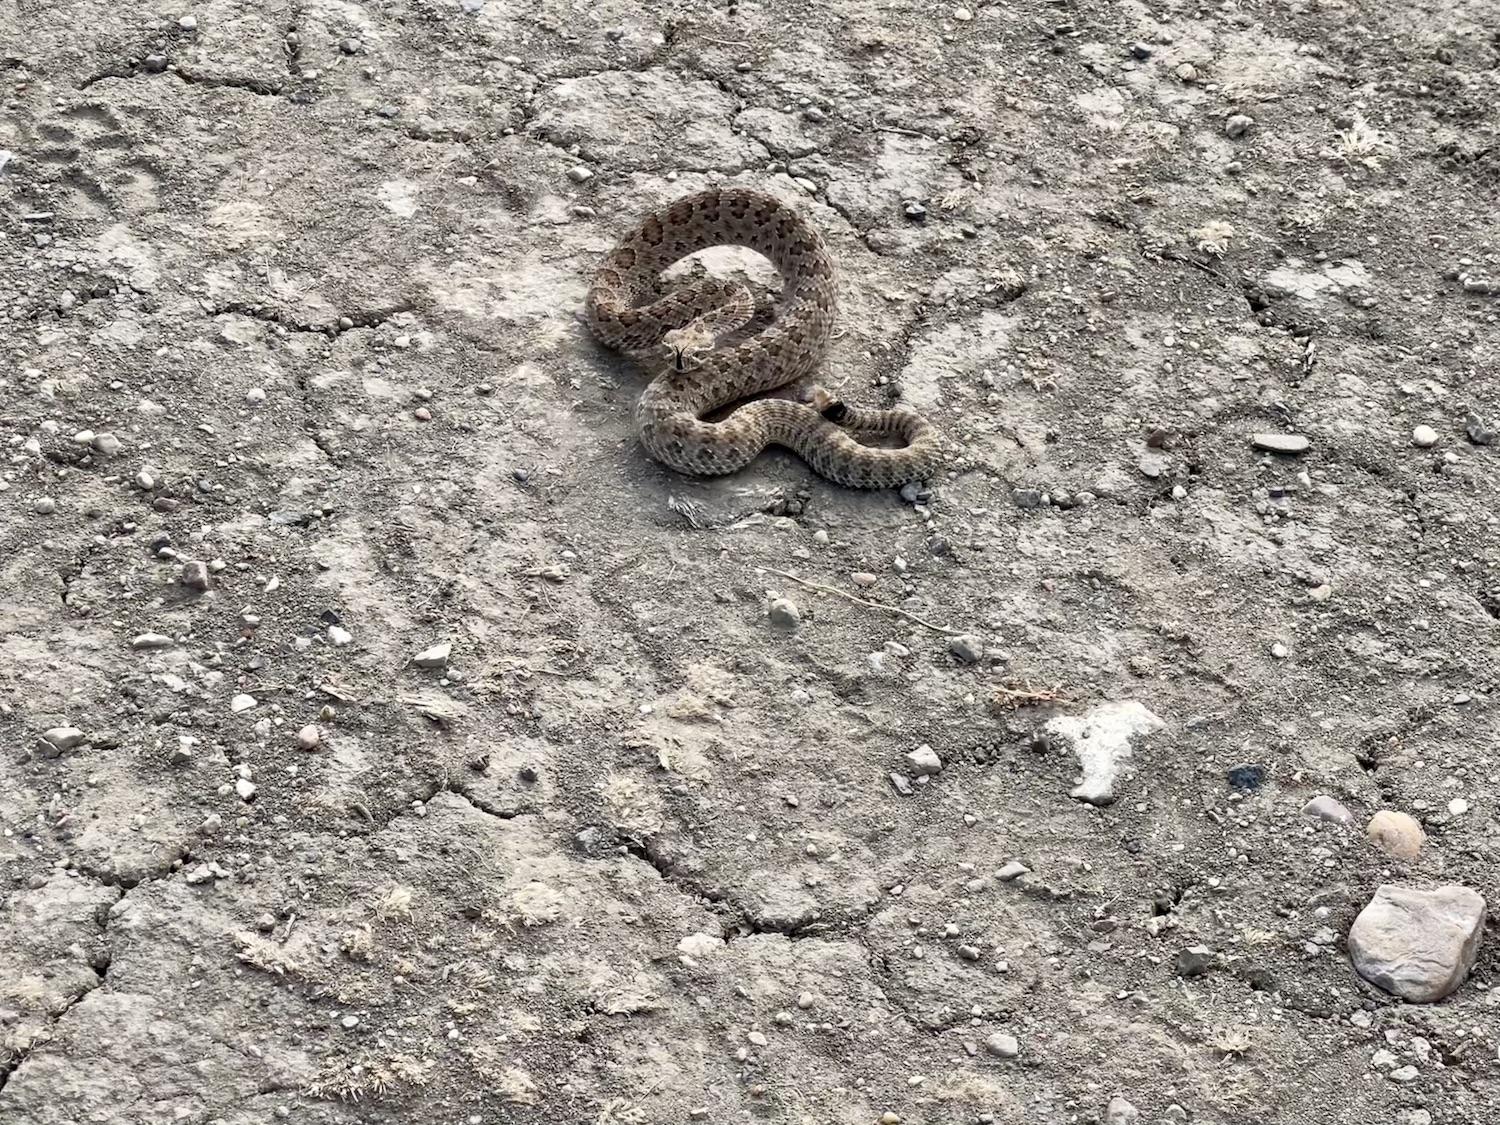 We didn't find lizards but did spot this Prairie rattlesnake in the parking lot.